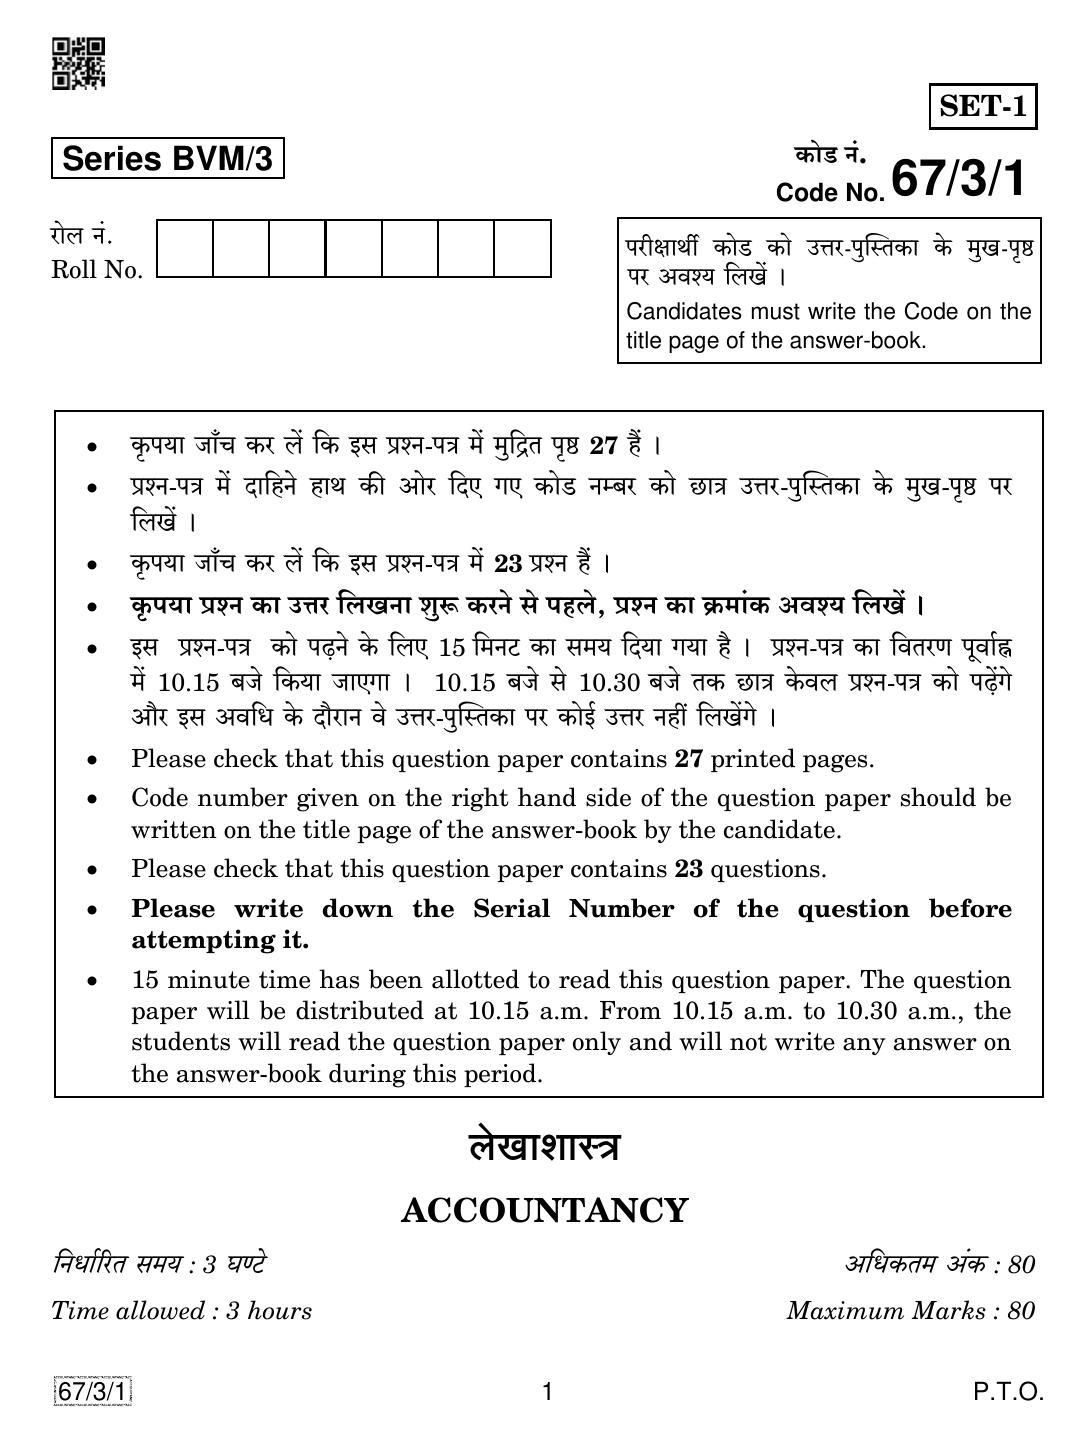 CBSE Class 12 67-3-1 Accountancy 2019 Question Paper - Page 1